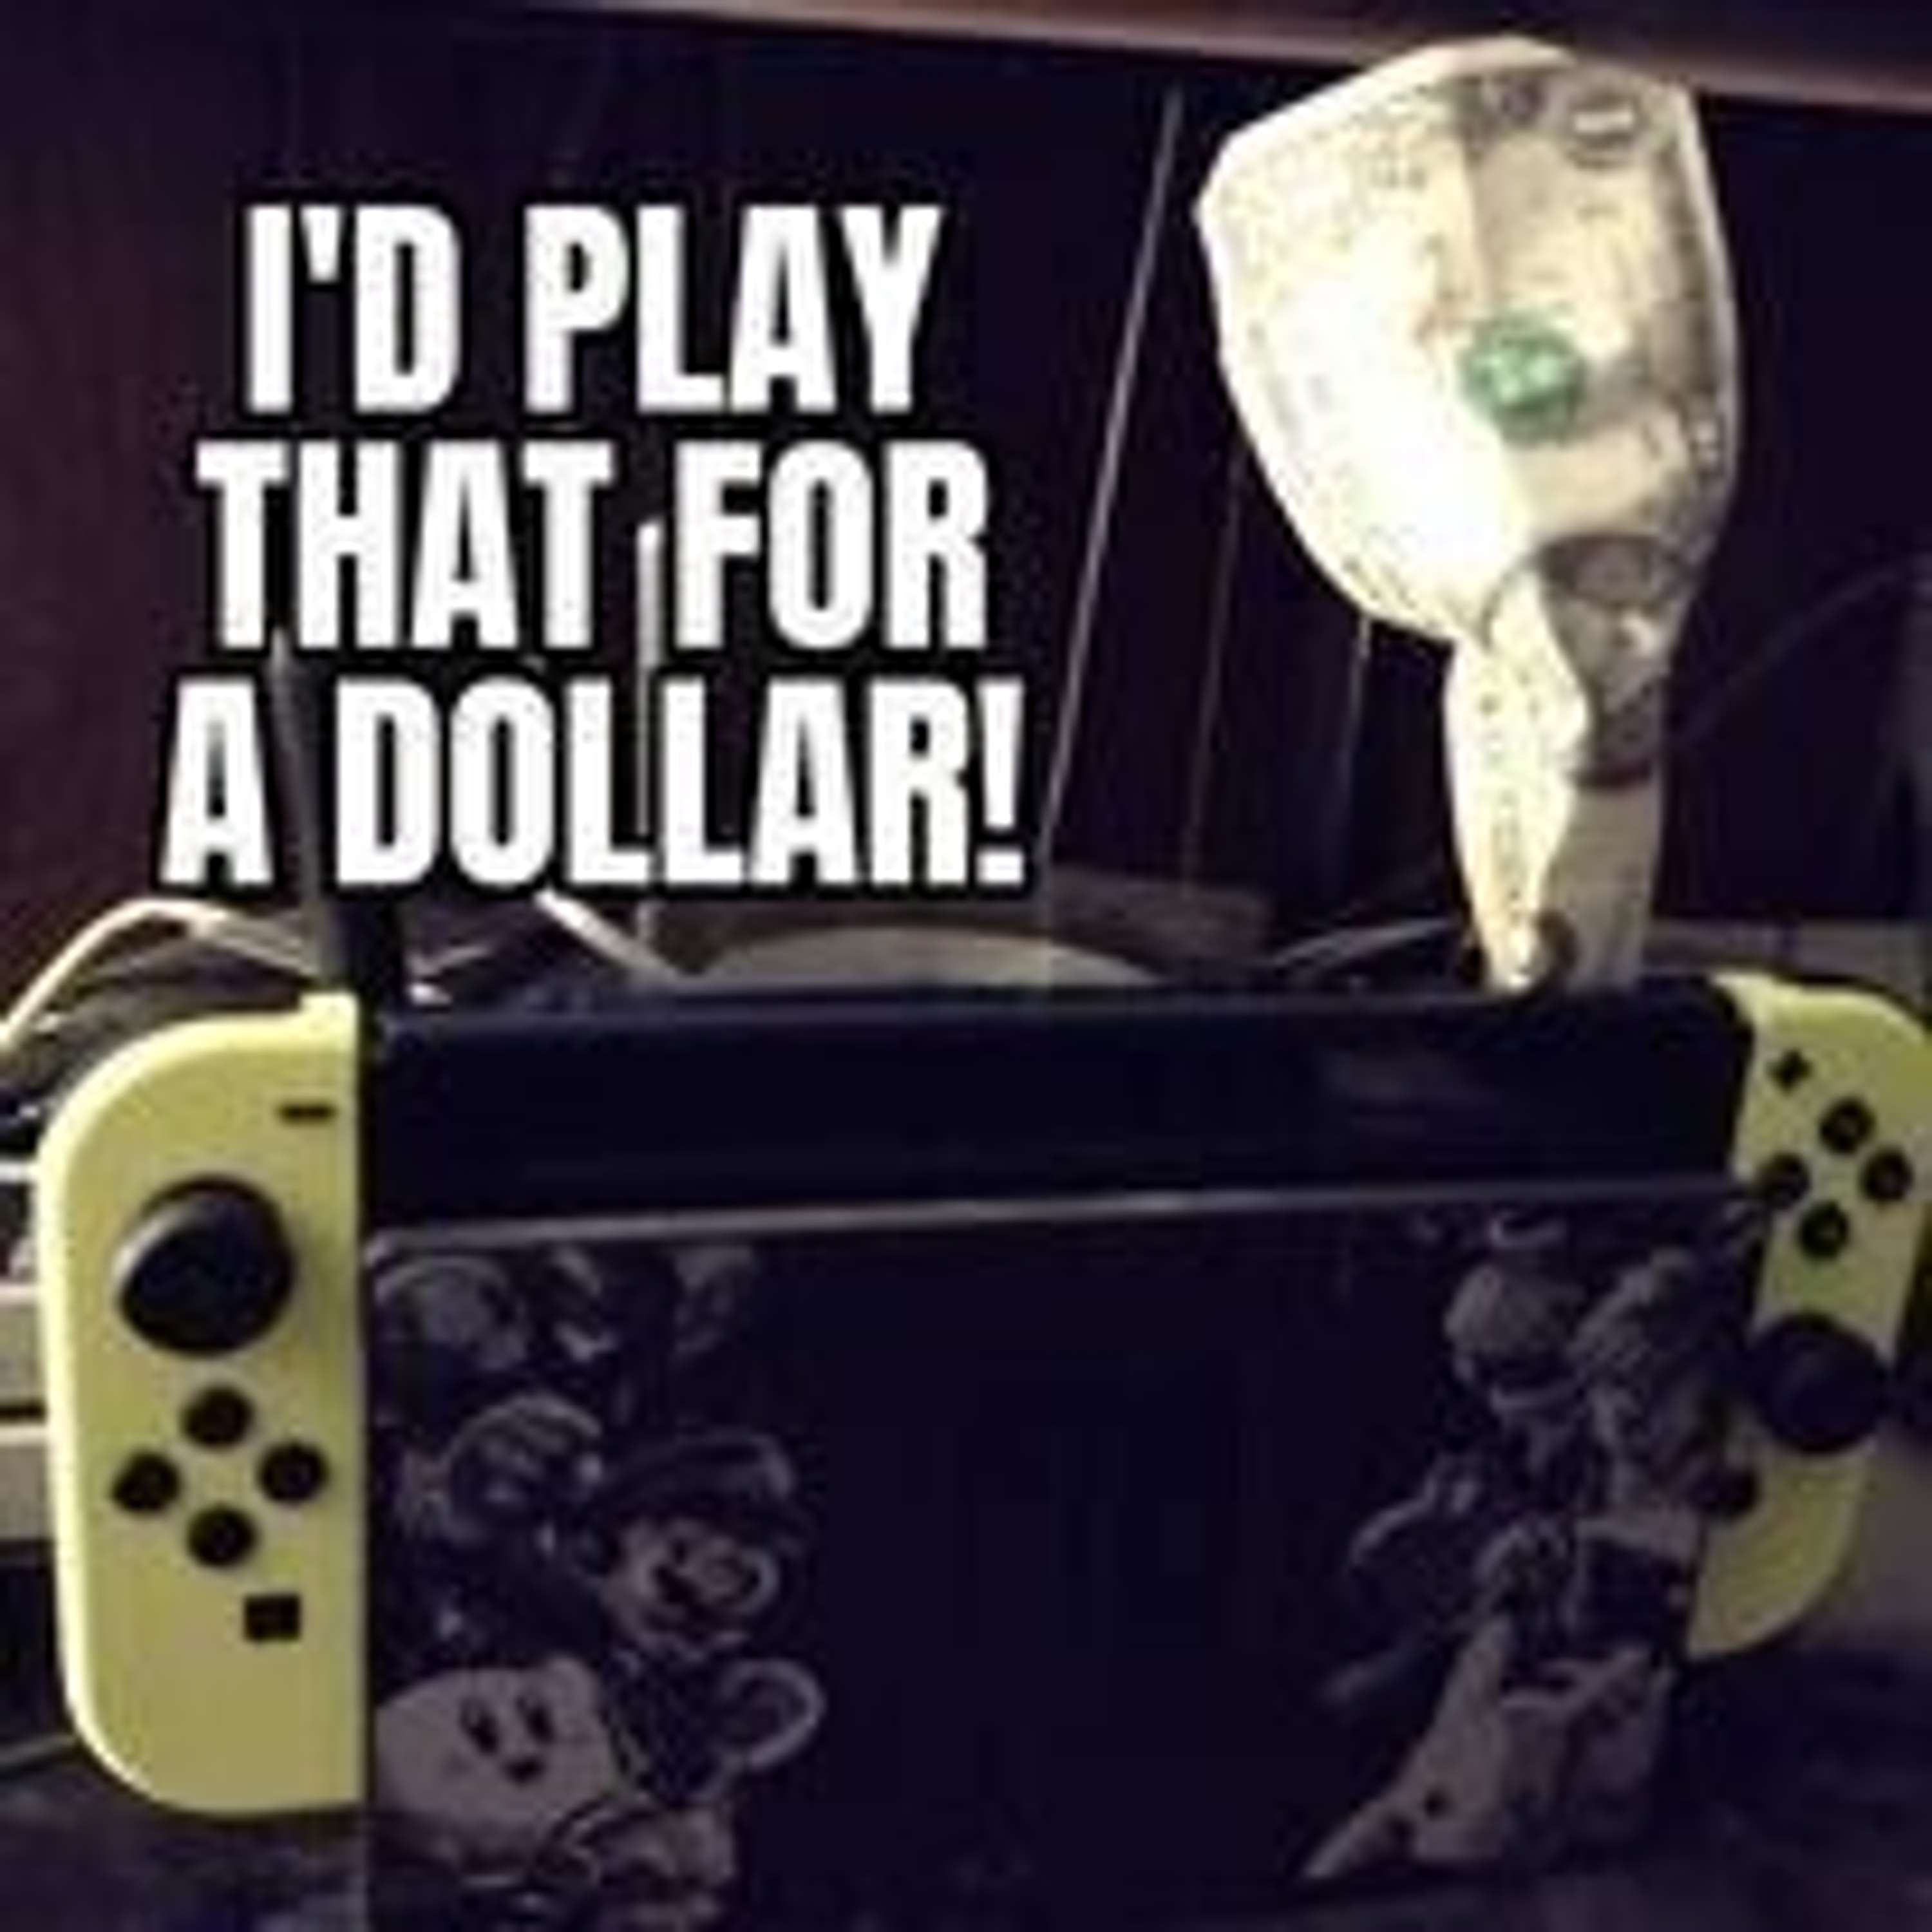 I’d Play That For A Dollar: Twenty Three Cents In The Couch Cushions